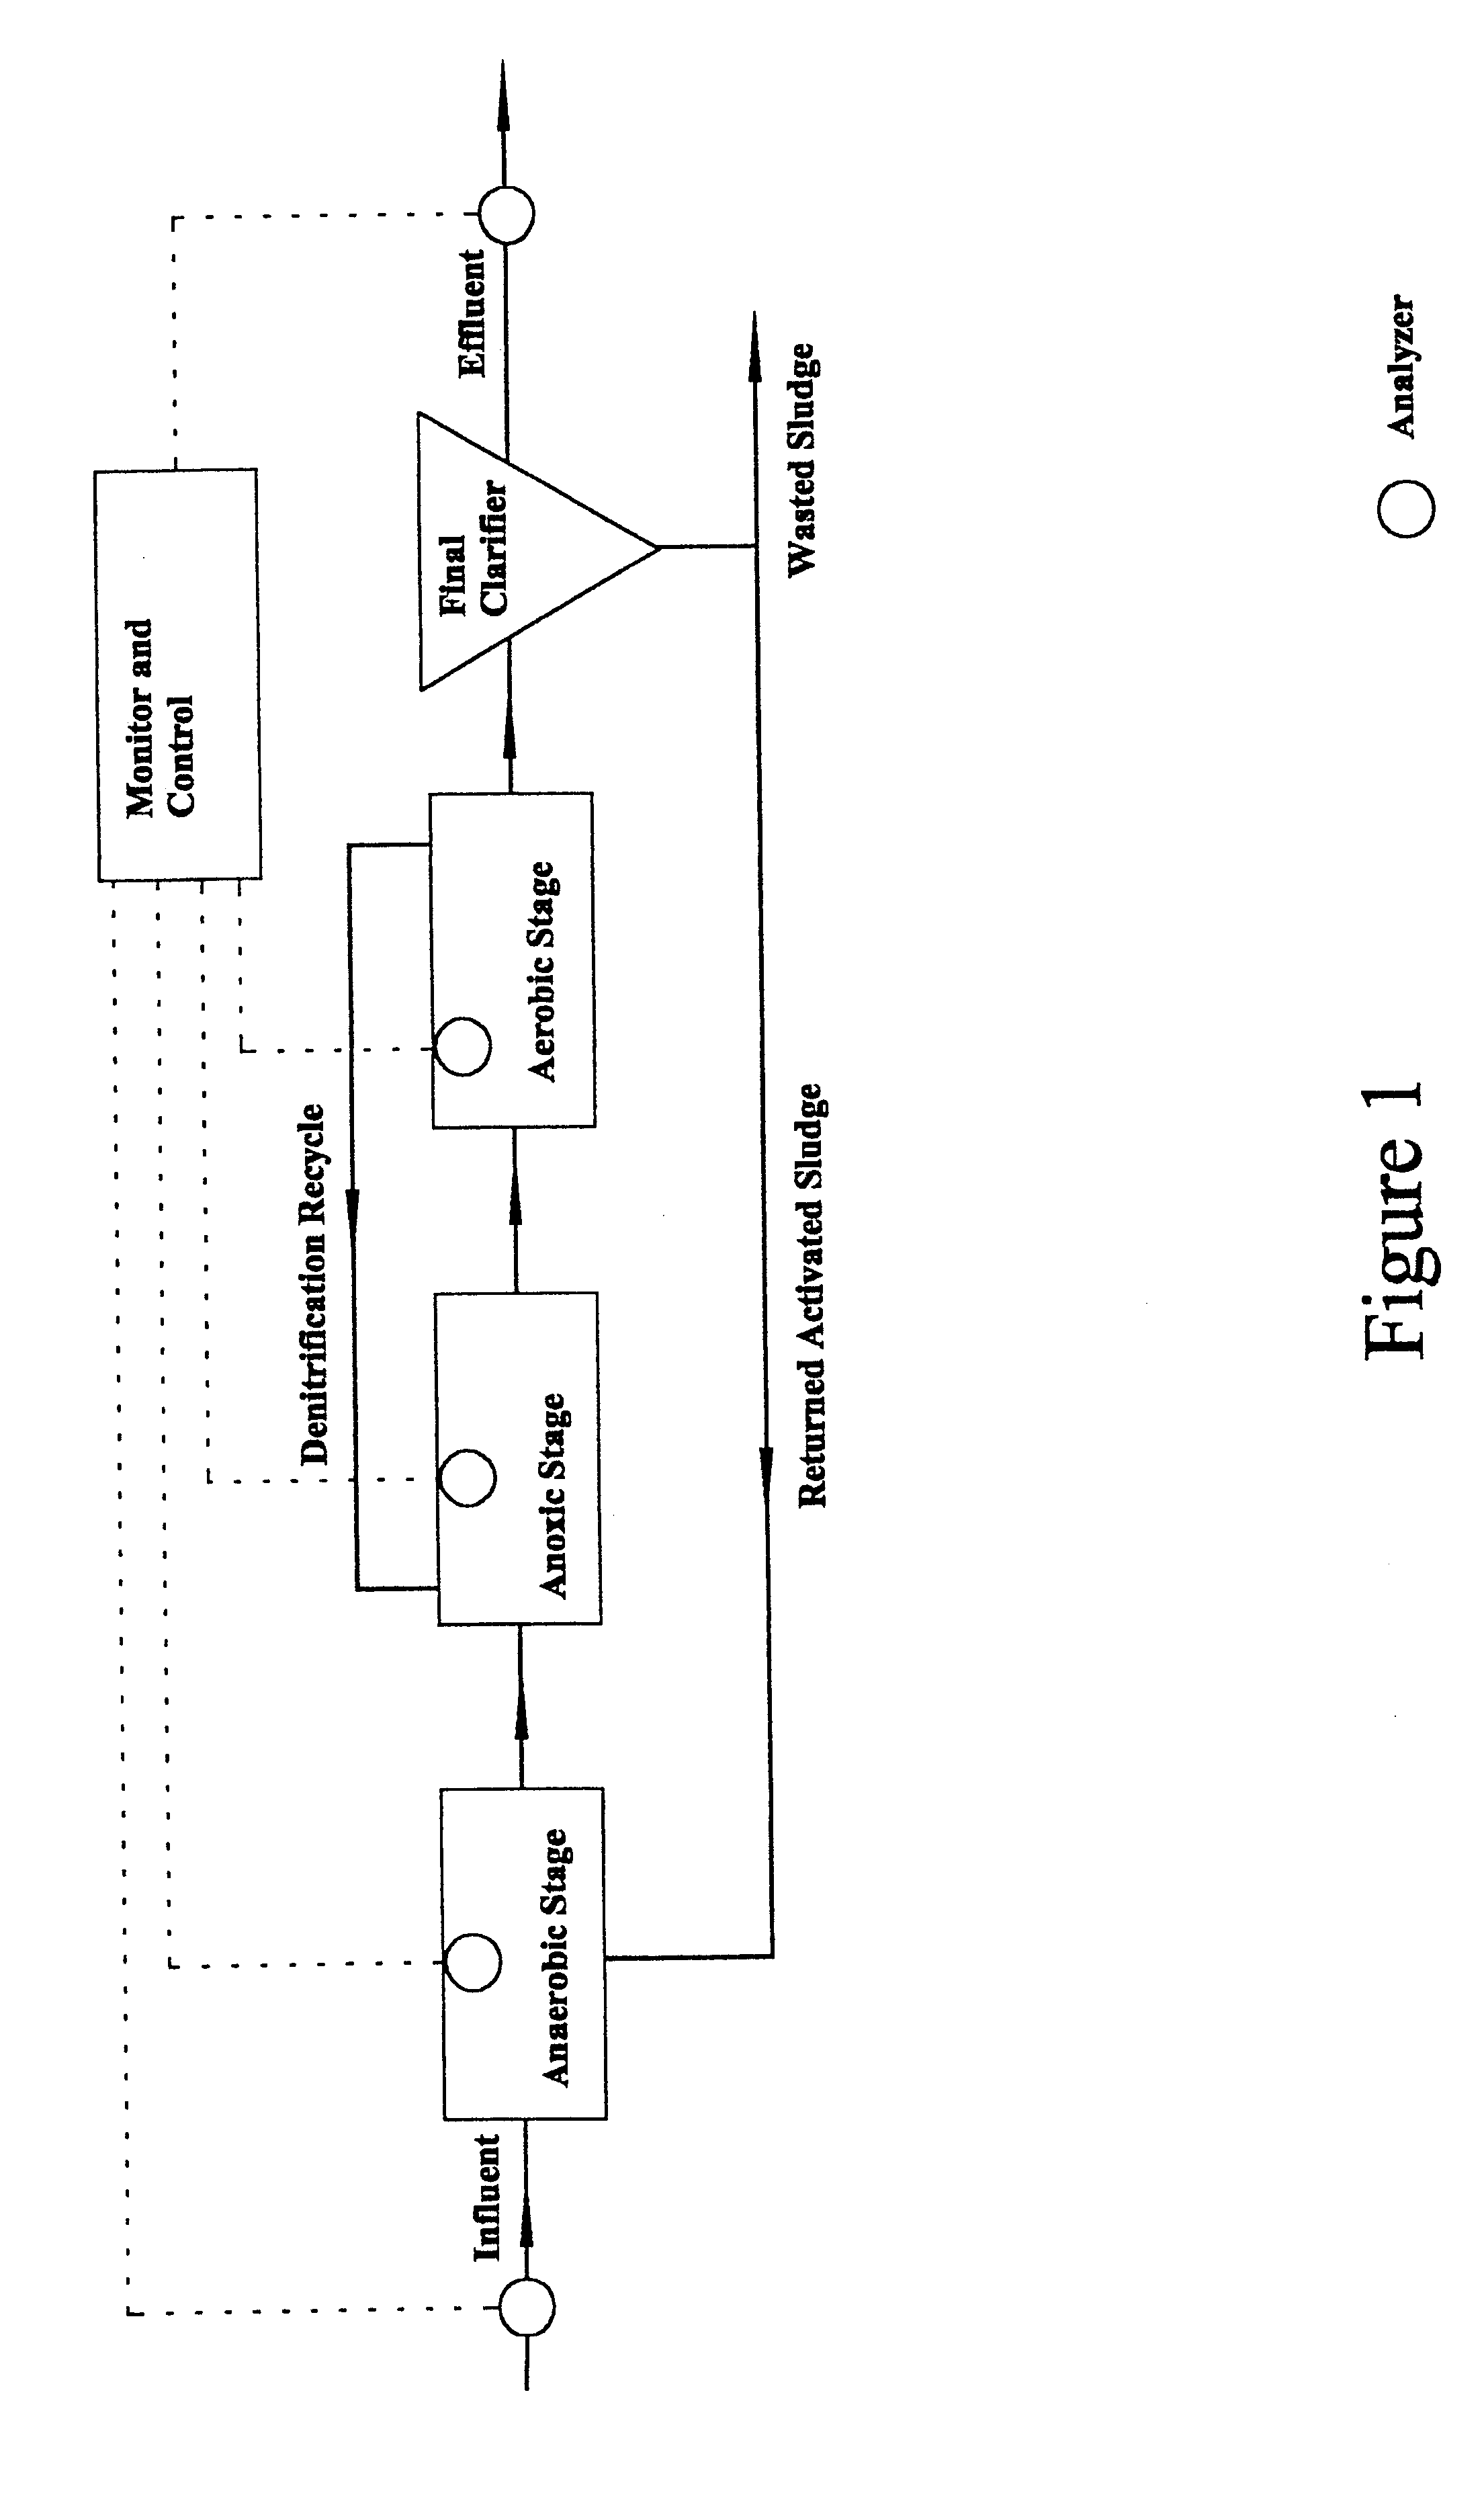 Method for measuring ammonia in biochemical processes